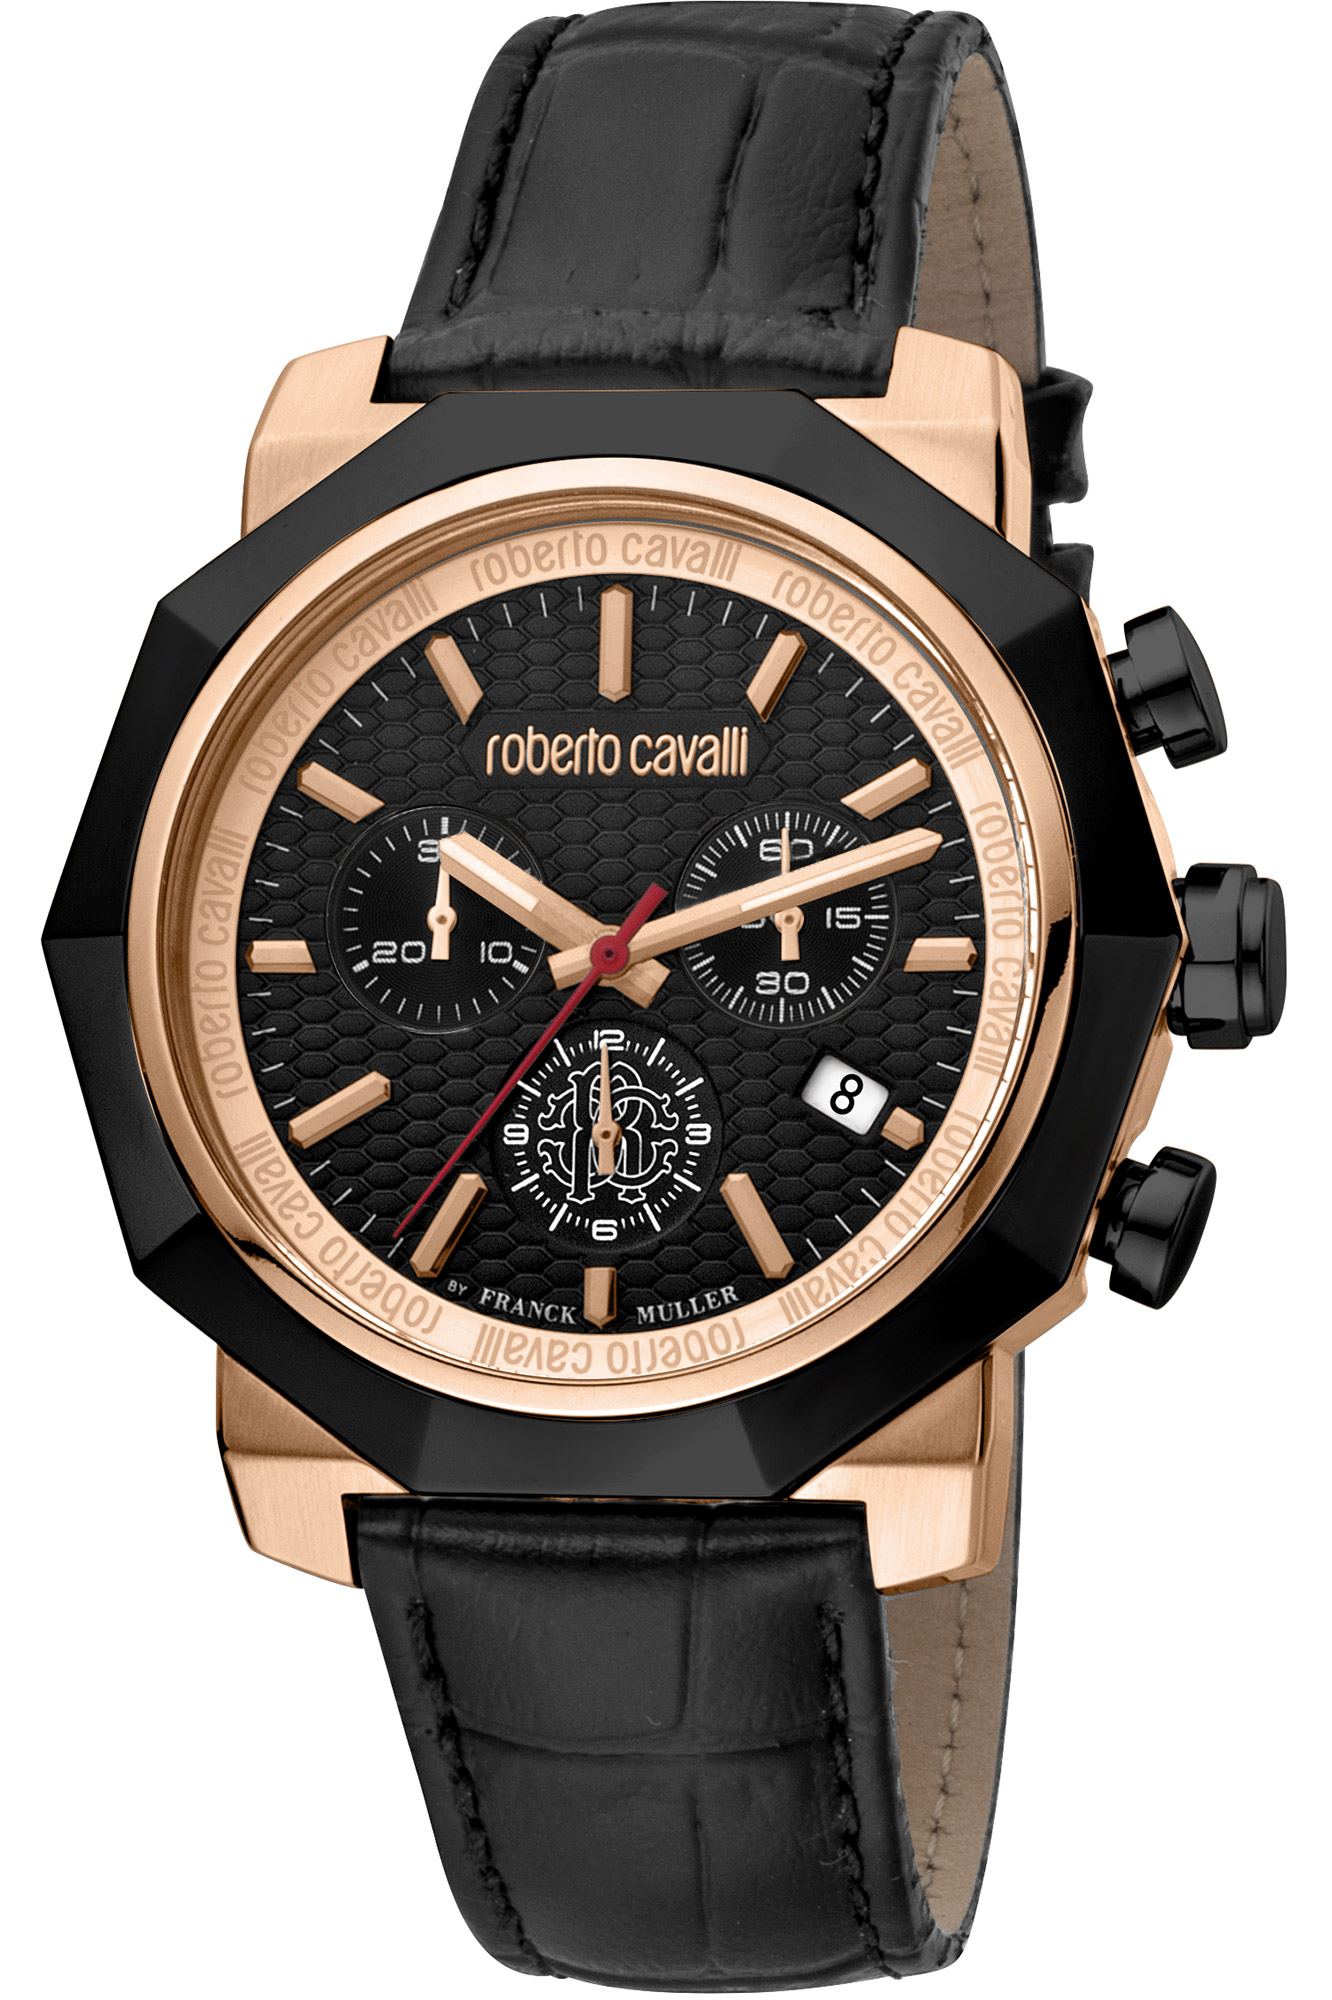 Roberto Cavalli by Franck MullerRV1G118L0041 - Aion Time